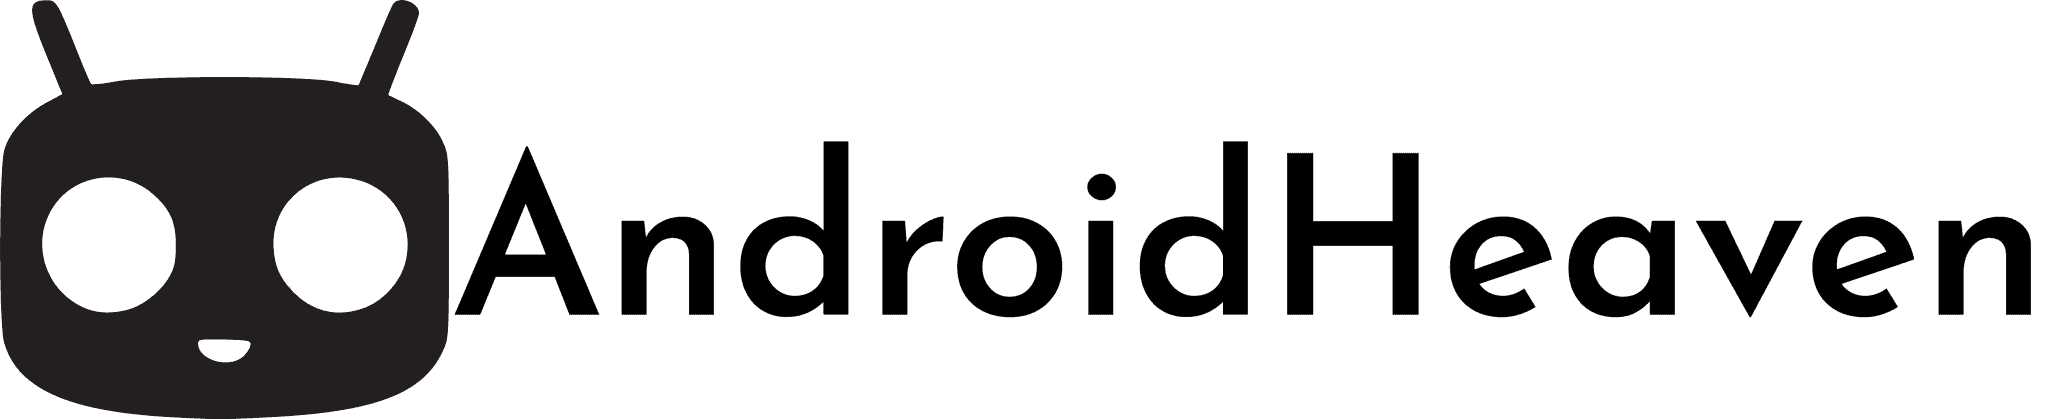 android_logo-2048x419